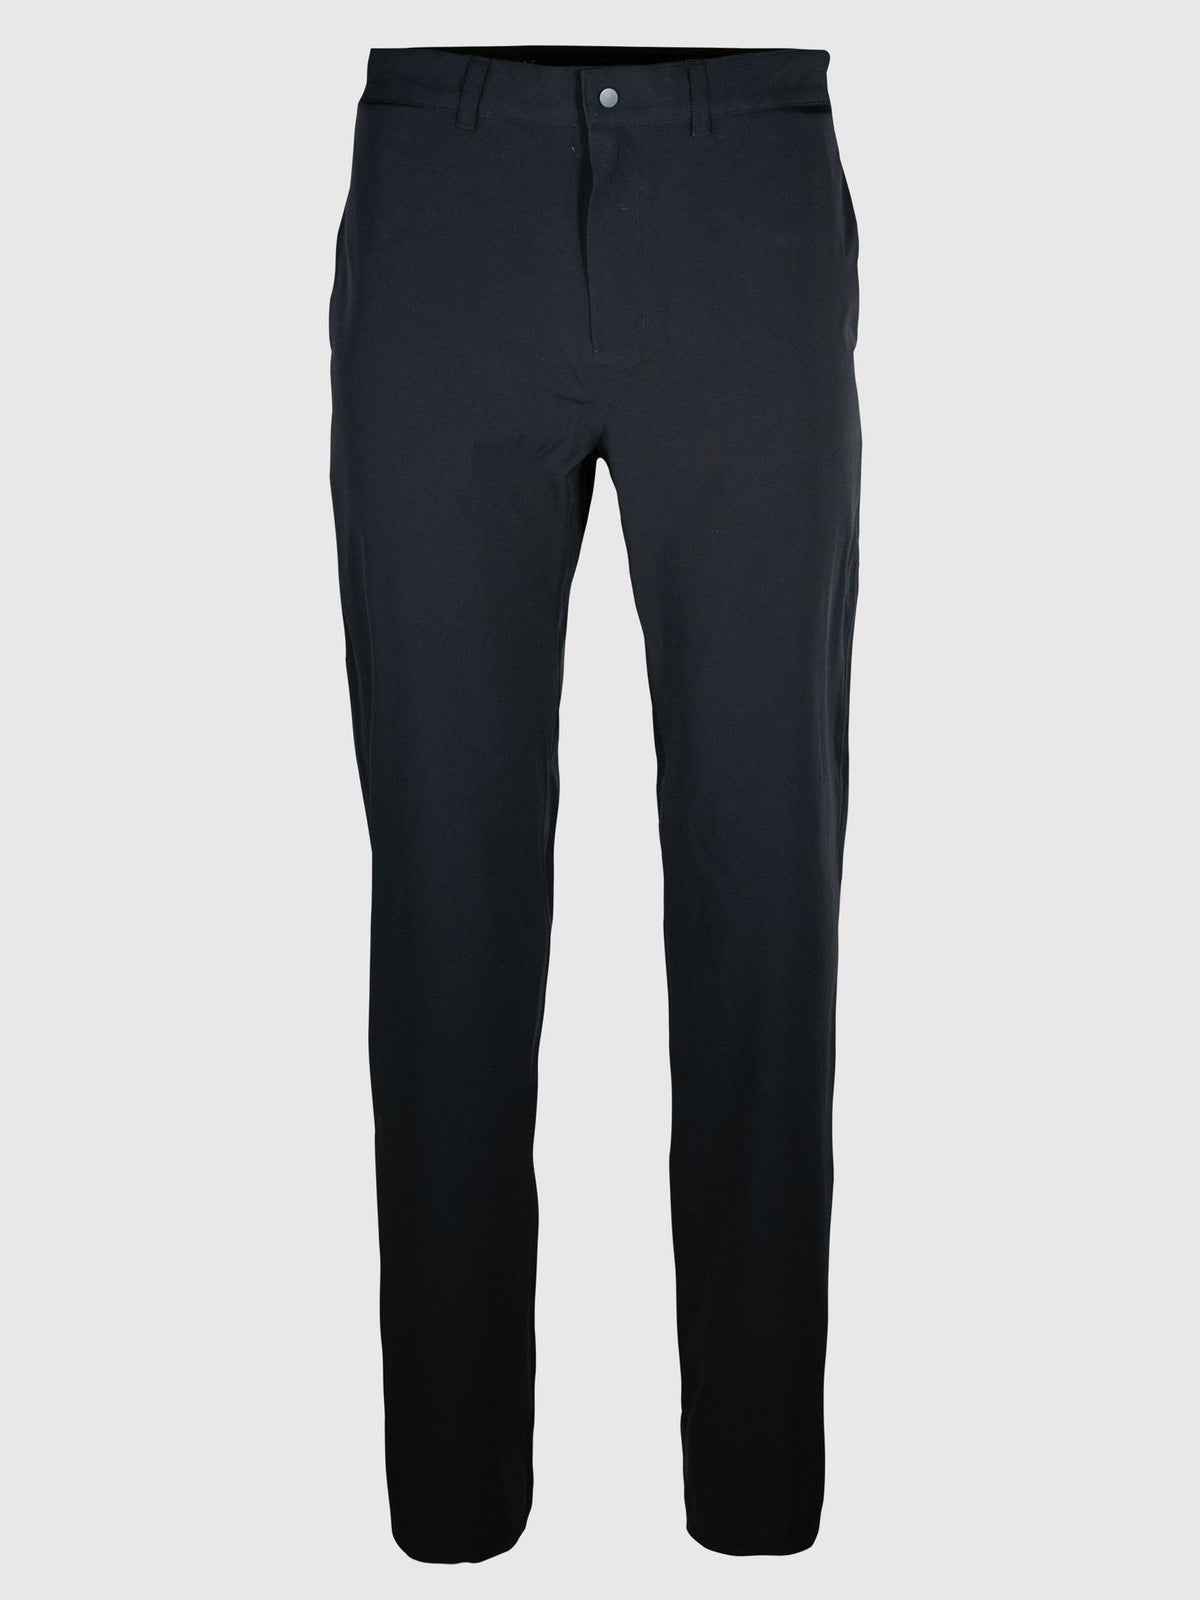 Black Tapered All-Weather Lined Pant